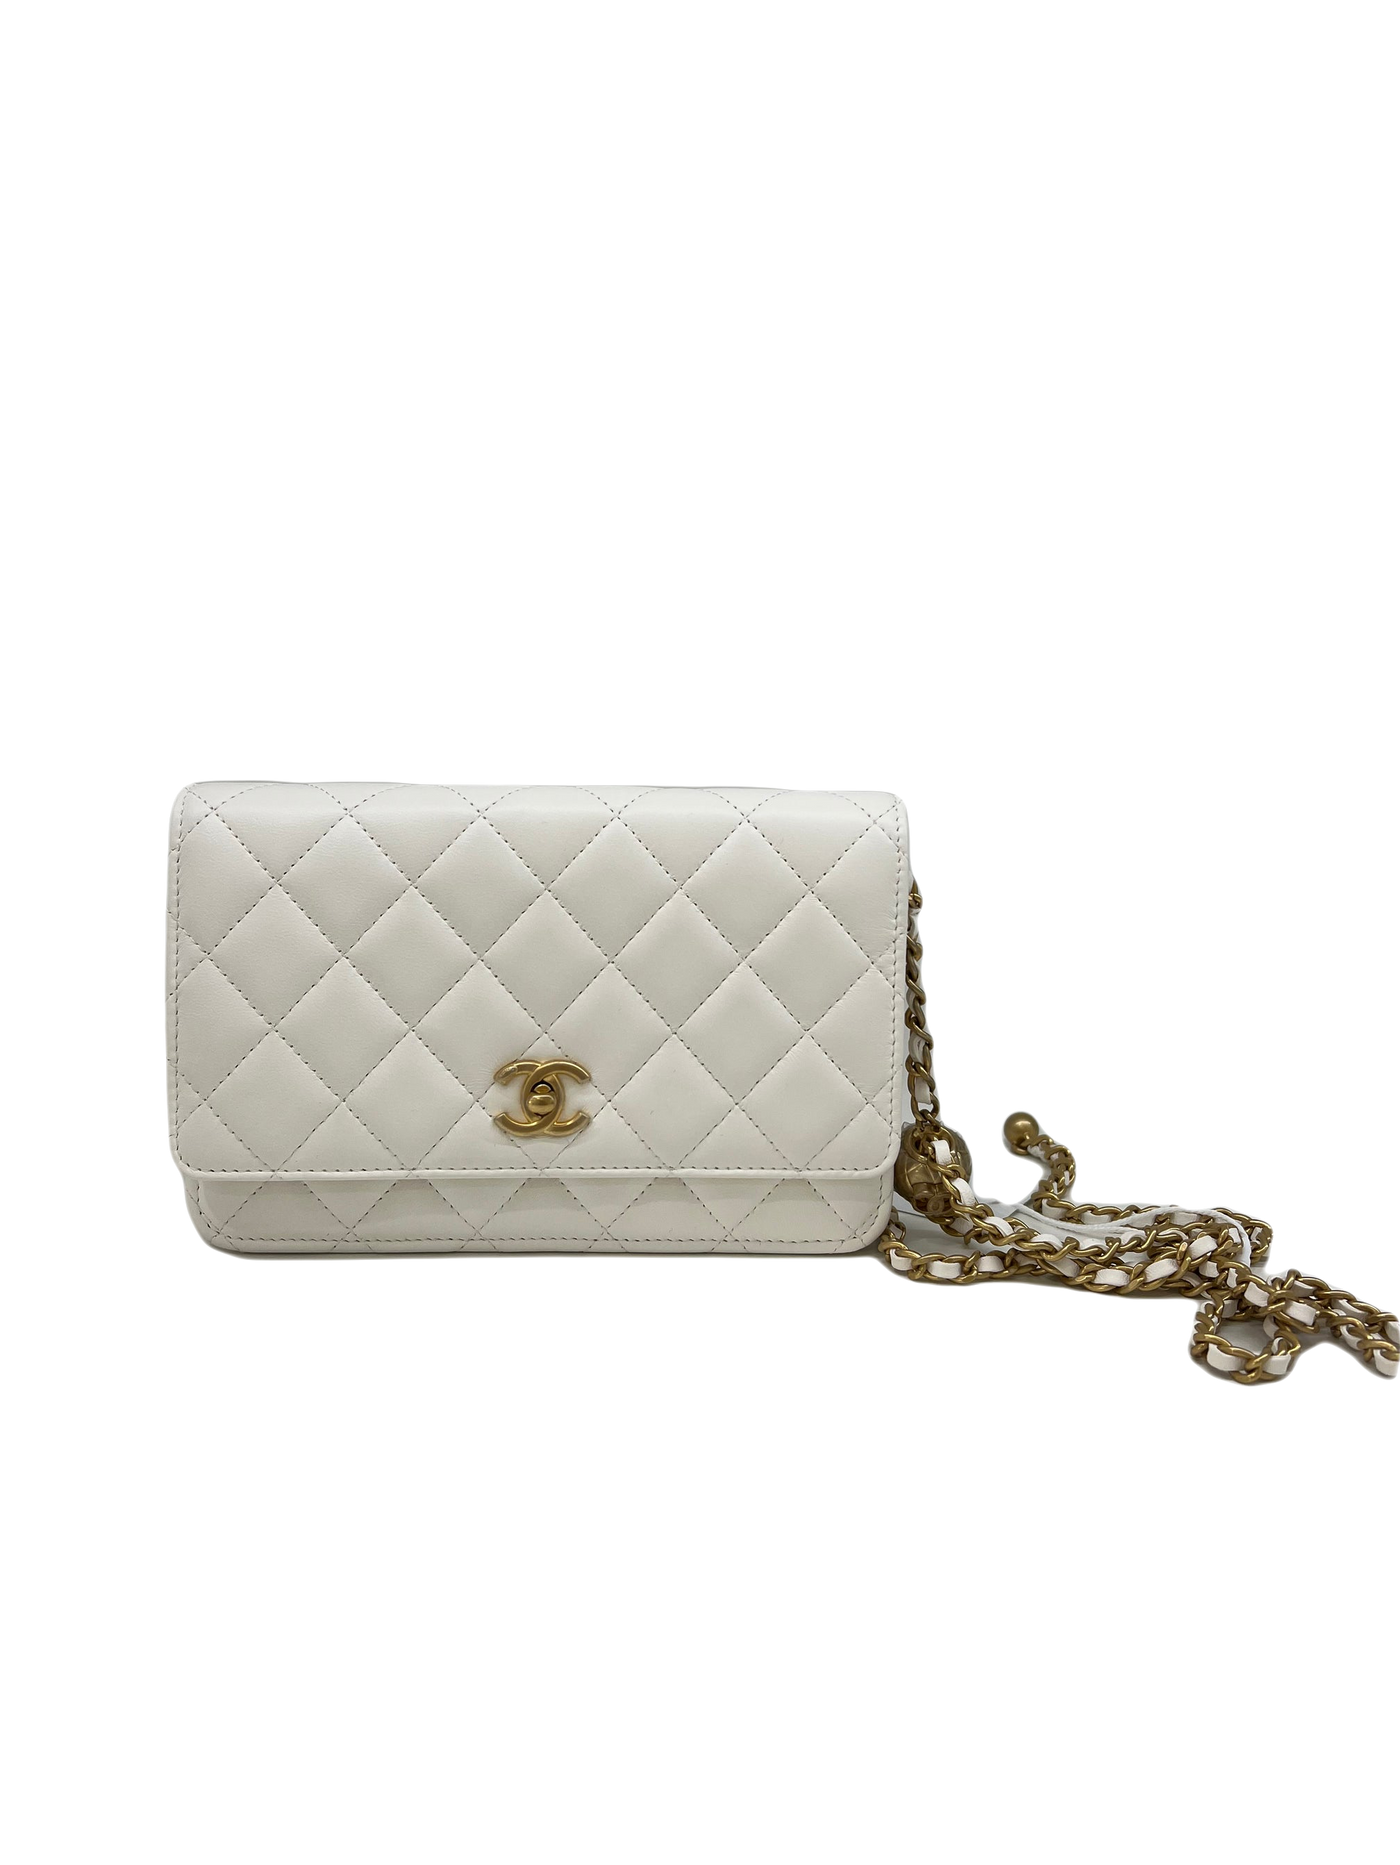 Chanel WOC (Wallet on Chain) Pearl Crush - White GHW - SOLD